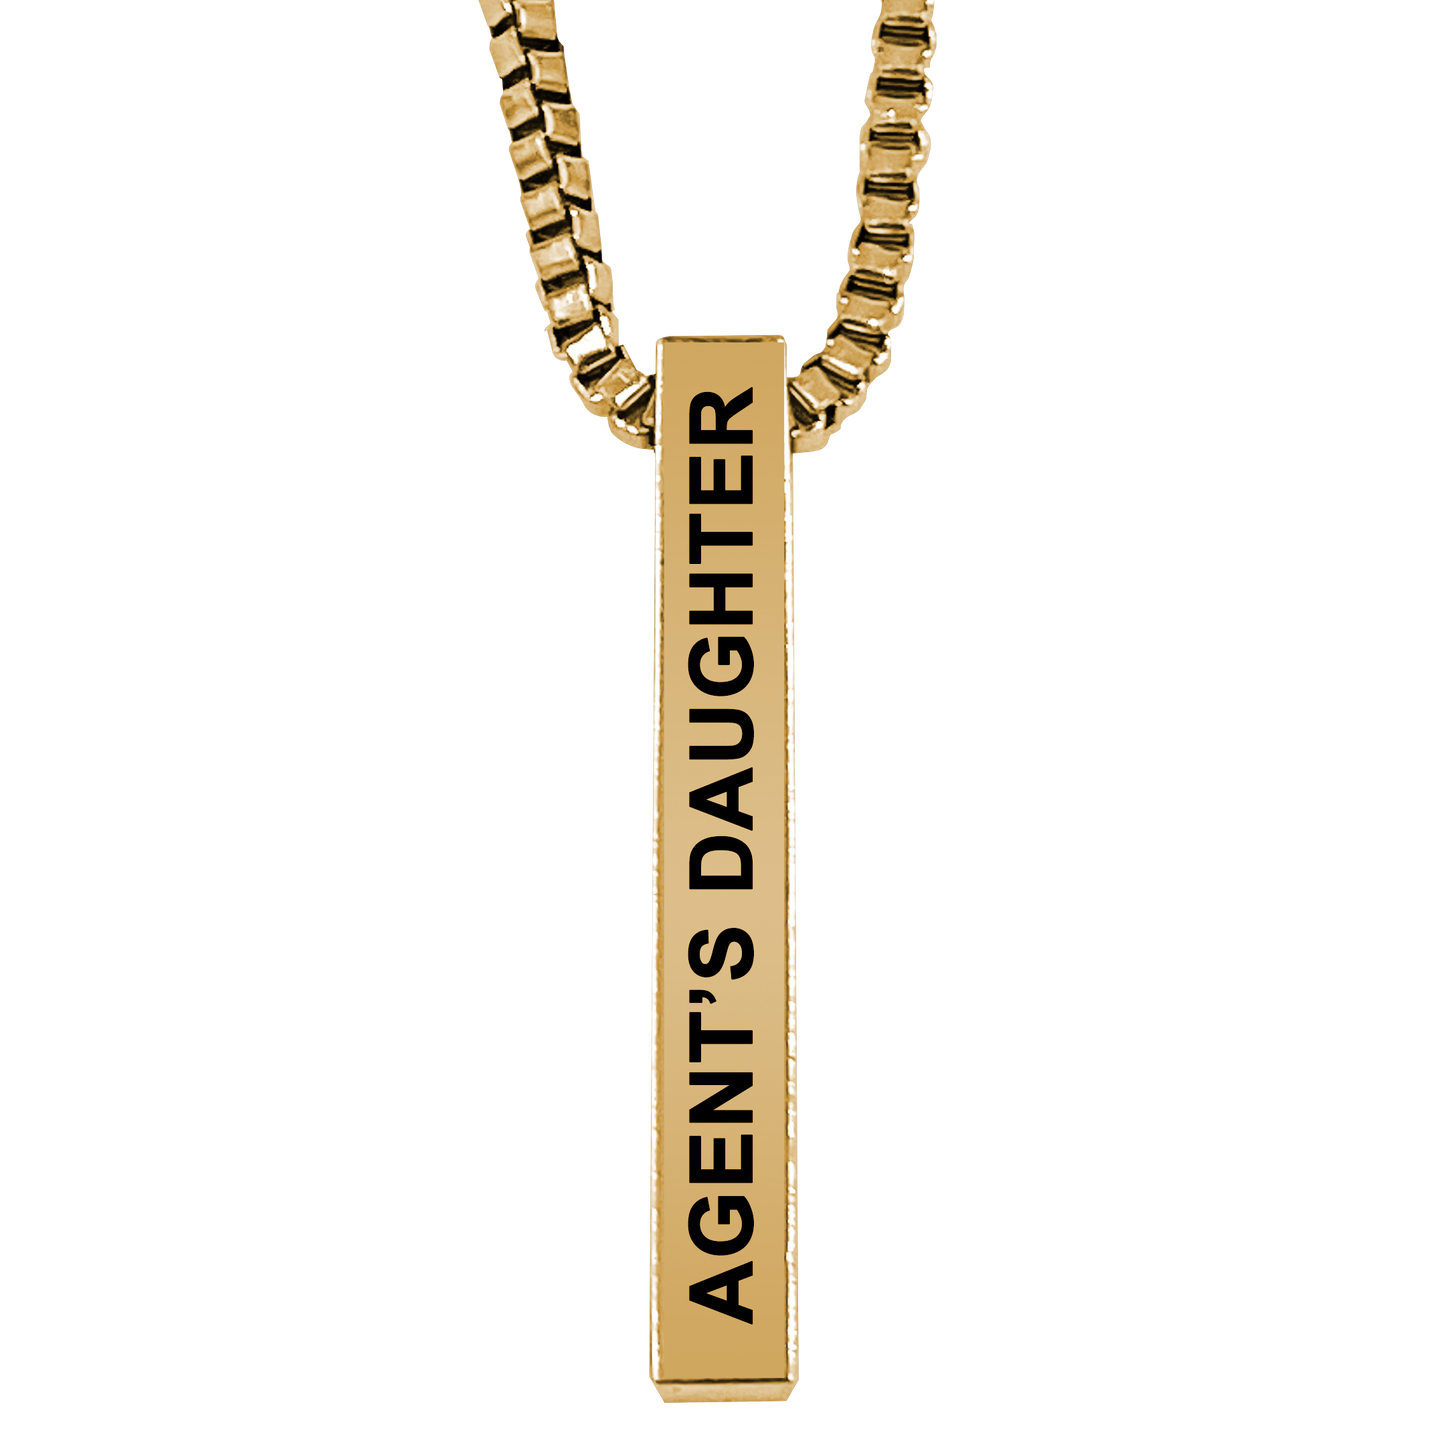 Agent's Daughter Gold Plated Pillar Bar Pendant Necklace Gift Mother's Day Christmas Holiday Anniversary Police Sheriff Officer First Responder Law Enforcement